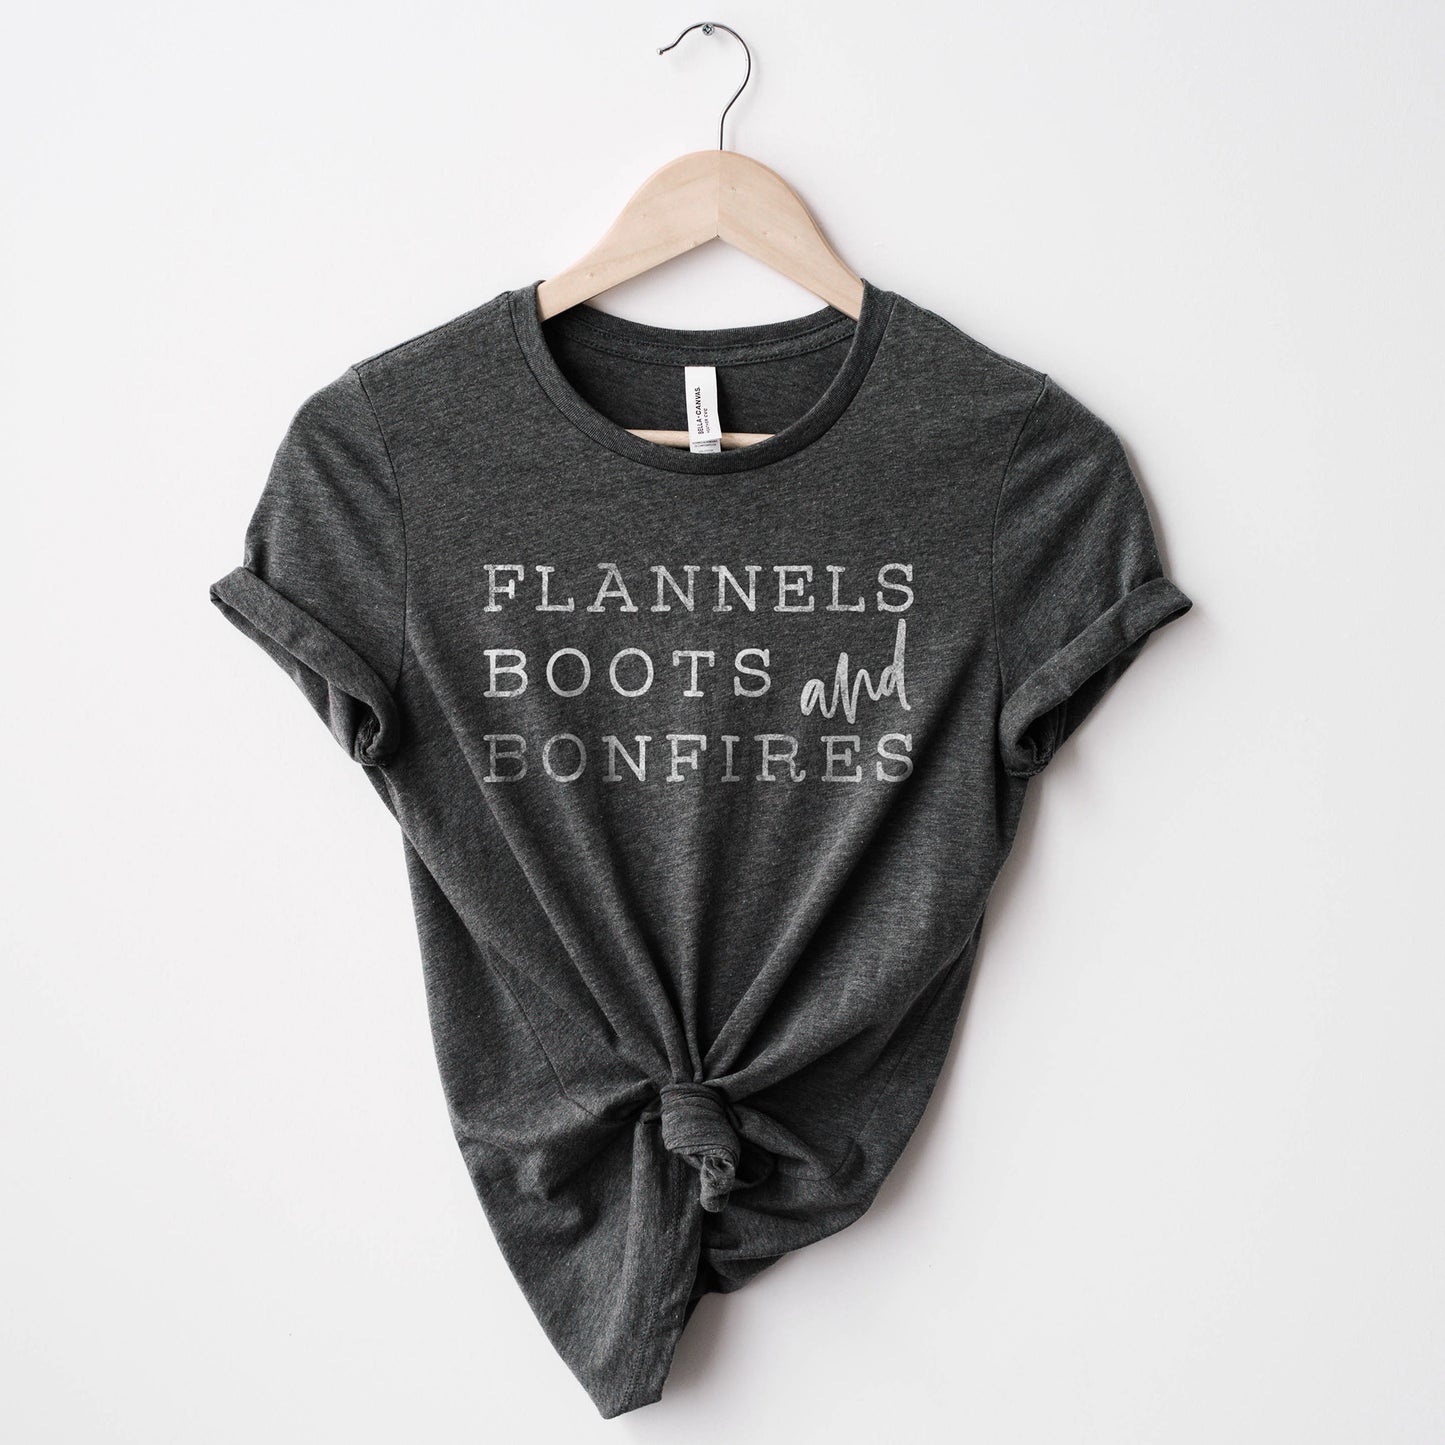 a flannel boots and bonfires tee in Dark Grey Heather